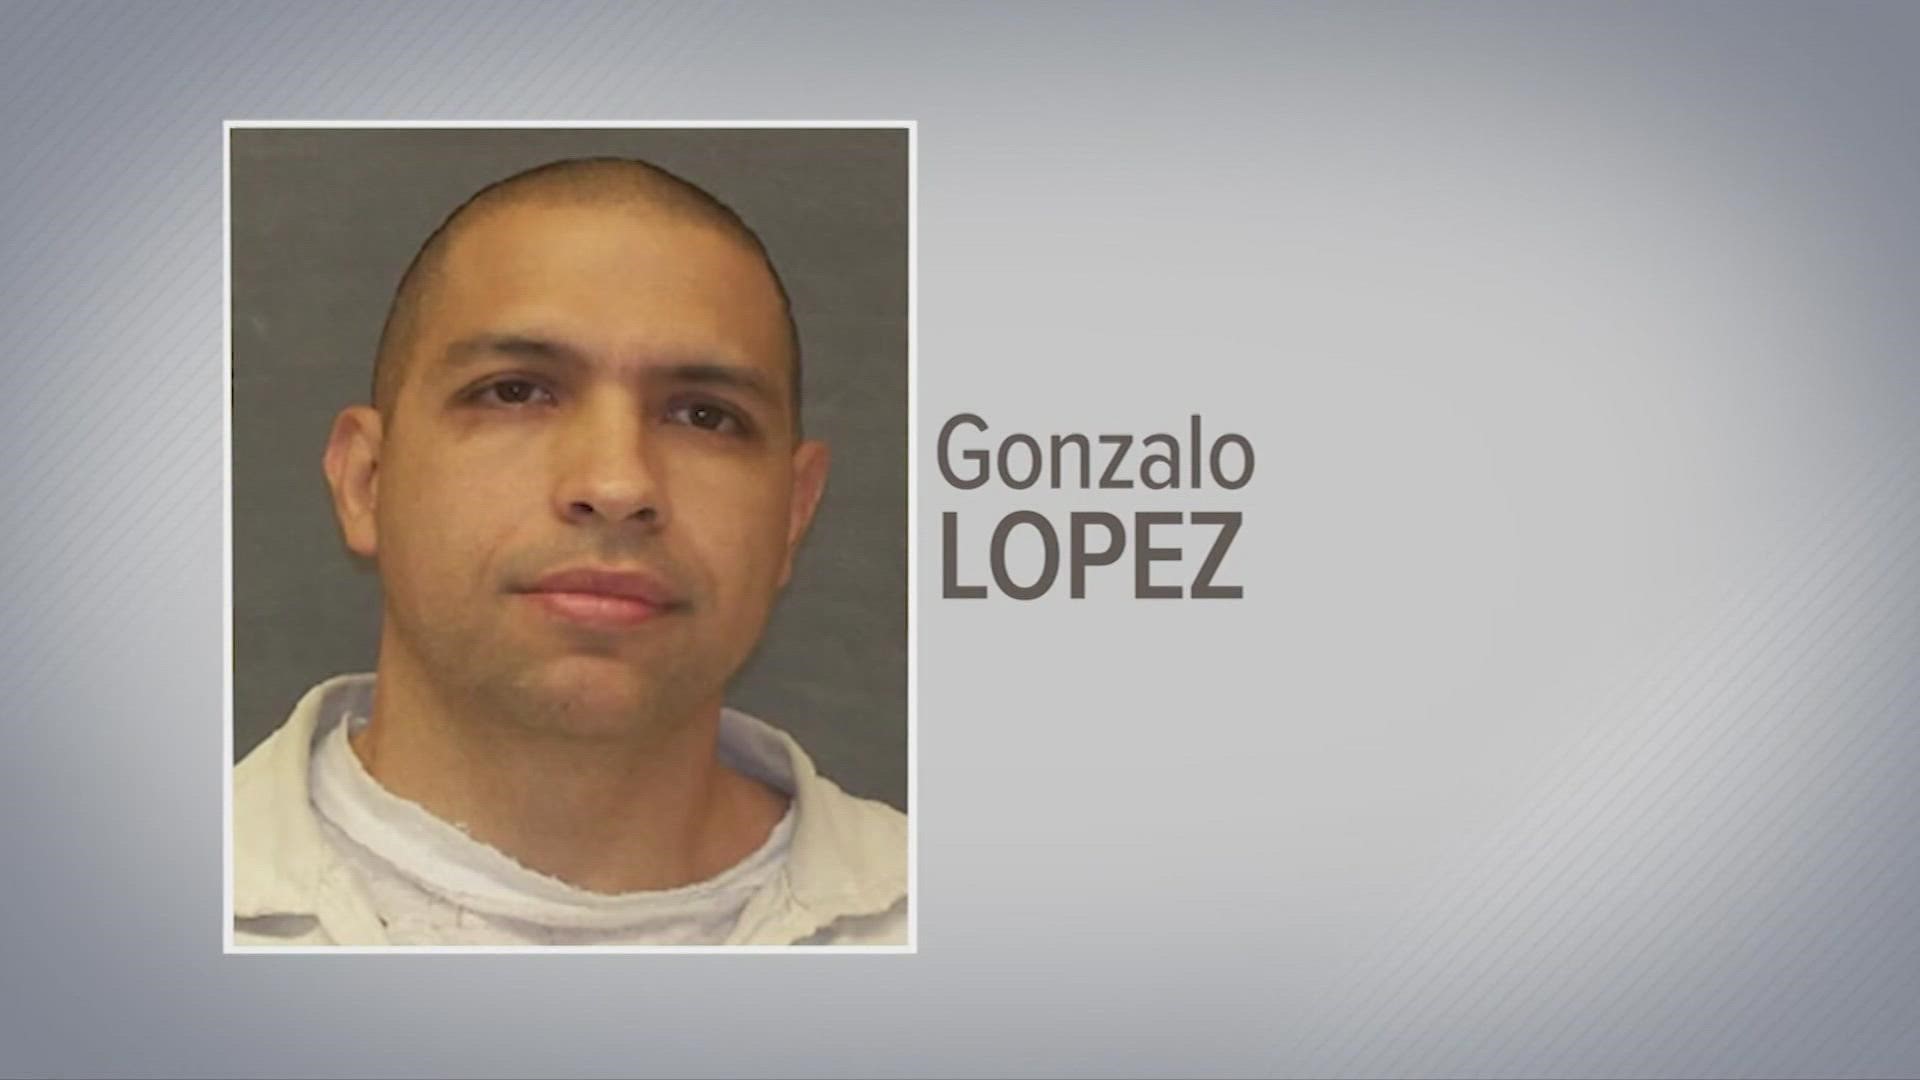 KHOU 11 has learned that Gonzalo Lopez, the escaped inmate who killed five people while on the run, had a discipline record that goes back six years.